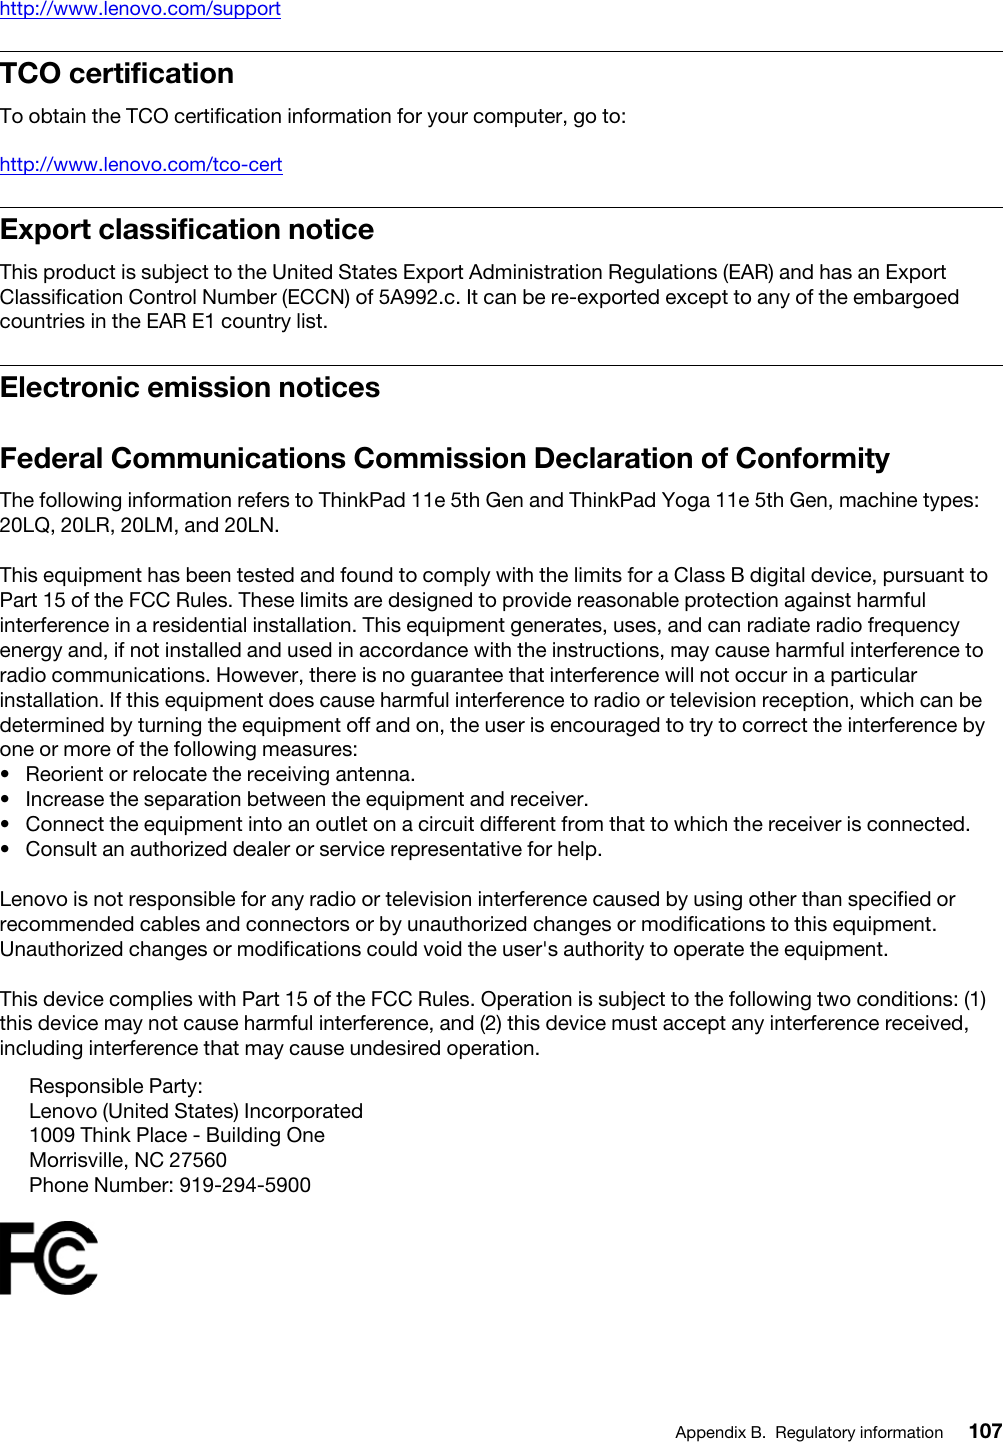 http://www.lenovo.com/supportTCO certificationTo obtain the TCO certification information for your computer, go to:http://www.lenovo.com/tco-certExport classification noticeThis product is subject to the United States Export Administration Regulations (EAR) and has an Export Classification Control Number (ECCN) of 5A992.c. It can be re-exported except to any of the embargoed countries in the EAR E1 country list.Electronic emission noticesFederal Communications Commission Declaration of ConformityThe following information refers to ThinkPad 11e 5th Gen and ThinkPad Yoga 11e 5th Gen, machine types: 20LQ, 20LR, 20LM, and 20LN.This equipment has been tested and found to comply with the limits for a Class B digital device, pursuant to Part 15 of the FCC Rules. These limits are designed to provide reasonable protection against harmful interference in a residential installation. This equipment generates, uses, and can radiate radio frequency energy and, if not installed and used in accordance with the instructions, may cause harmful interference to radio communications. However, there is no guarantee that interference will not occur in a particular installation. If this equipment does cause harmful interference to radio or television reception, which can be determined by turning the equipment off and on, the user is encouraged to try to correct the interference by one or more of the following measures:•  Reorient or relocate the receiving antenna.•  Increase the separation between the equipment and receiver.•  Connect the equipment into an outlet on a circuit different from that to which the receiver is connected.•  Consult an authorized dealer or service representative for help.Lenovo is not responsible for any radio or television interference caused by using other than specified or recommended cables and connectors or by unauthorized changes or modifications to this equipment. Unauthorized changes or modifications could void the user&apos;s authority to operate the equipment.This device complies with Part 15 of the FCC Rules. Operation is subject to the following two conditions: (1) this device may not cause harmful interference, and (2) this device must accept any interference received, including interference that may cause undesired operation.Responsible Party:Lenovo (United States) Incorporated1009 Think Place - Building OneMorrisville, NC 27560Phone Number: 919-294-5900Appendix B. Regulatory information 107